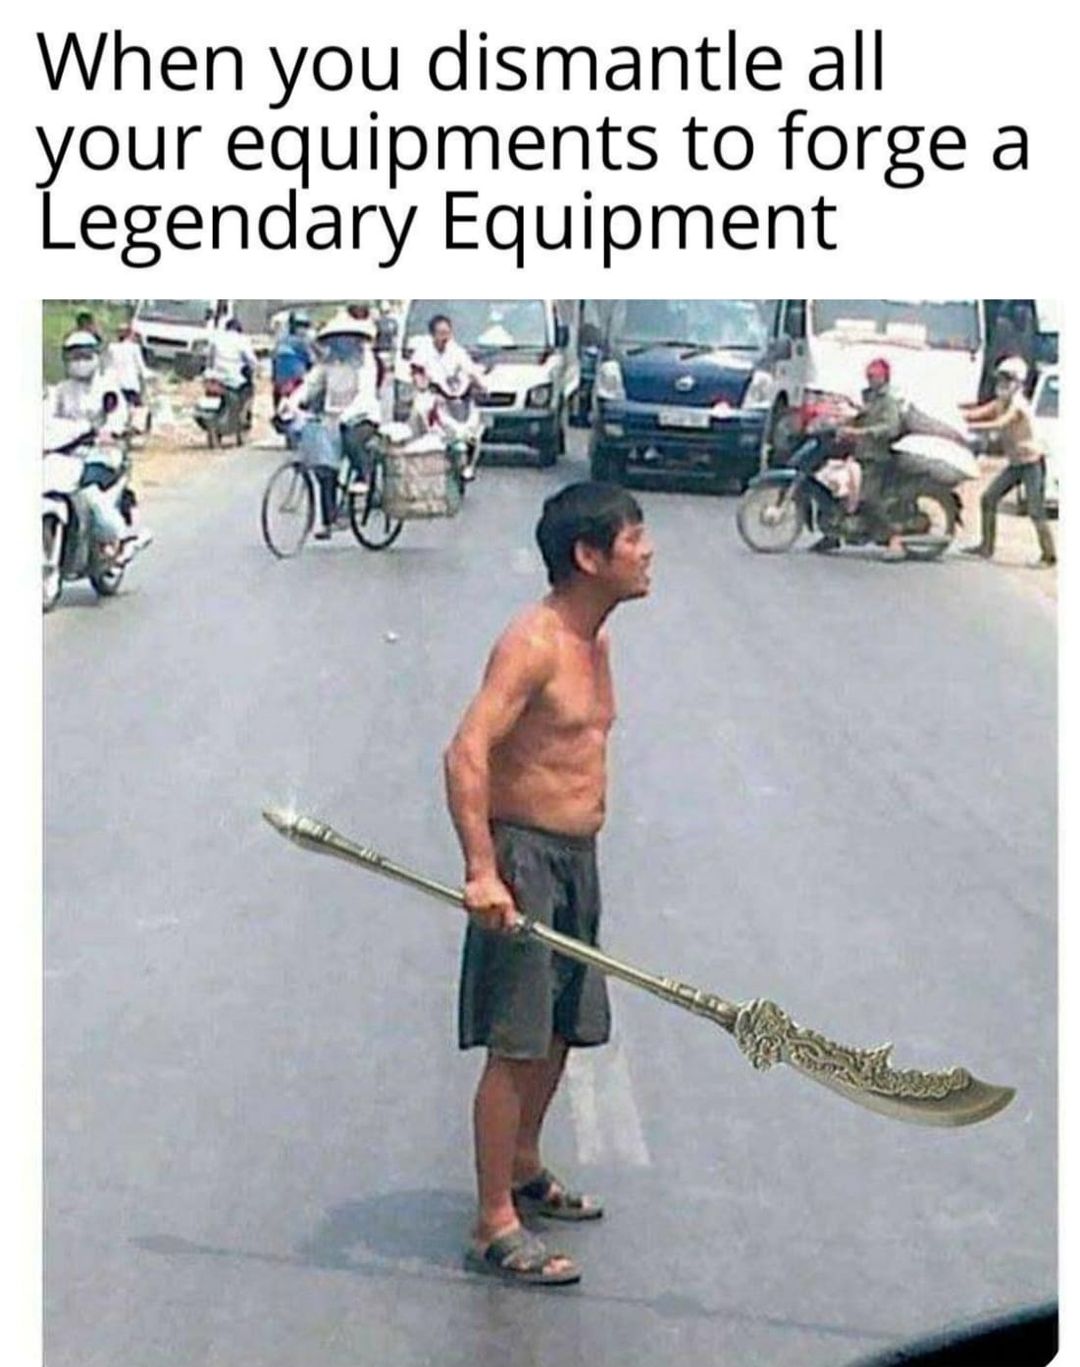 When you dismantle all your equipments to forge a Legendary Equipment